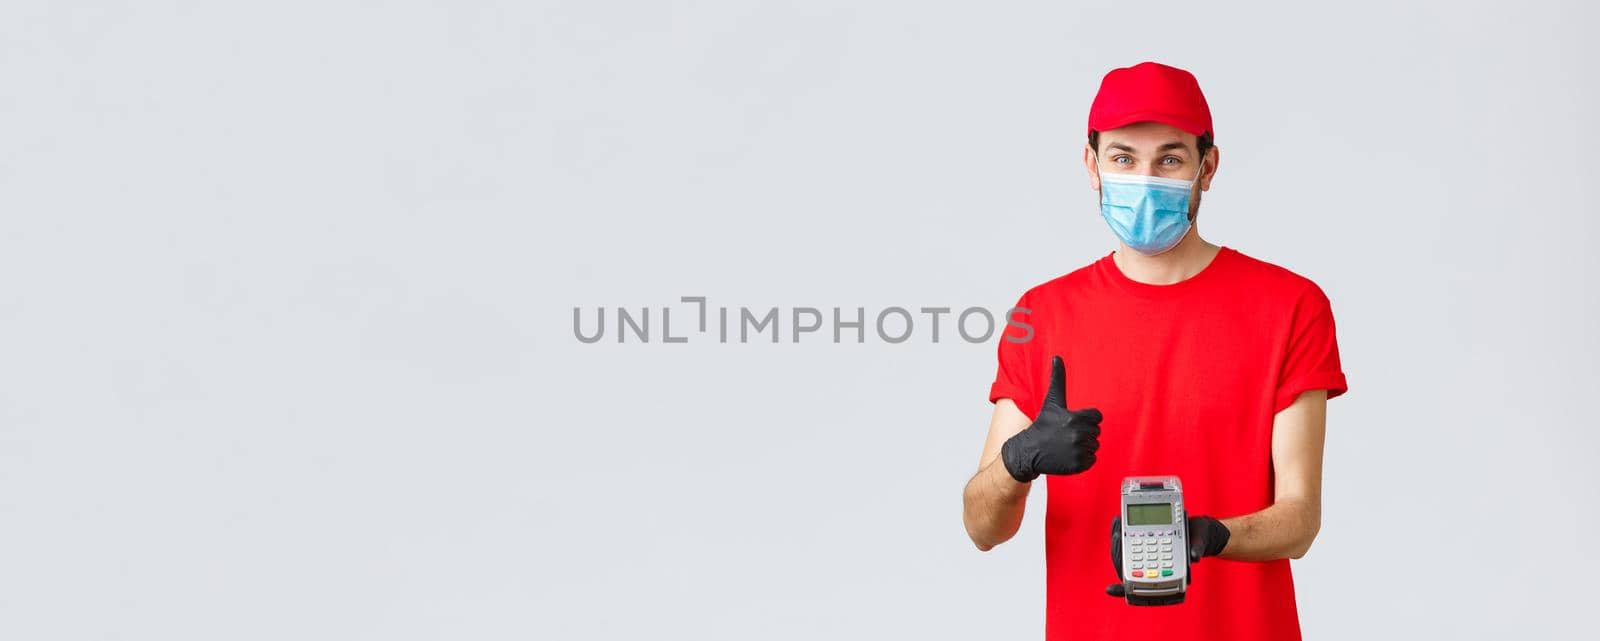 Contactless delivery, payment and online shopping during covid-19, self-quarantine. Friendly smiling courier in red uniform cap, t-shrit, medical mask and gloves, advice pay order with POS terminal by Benzoix